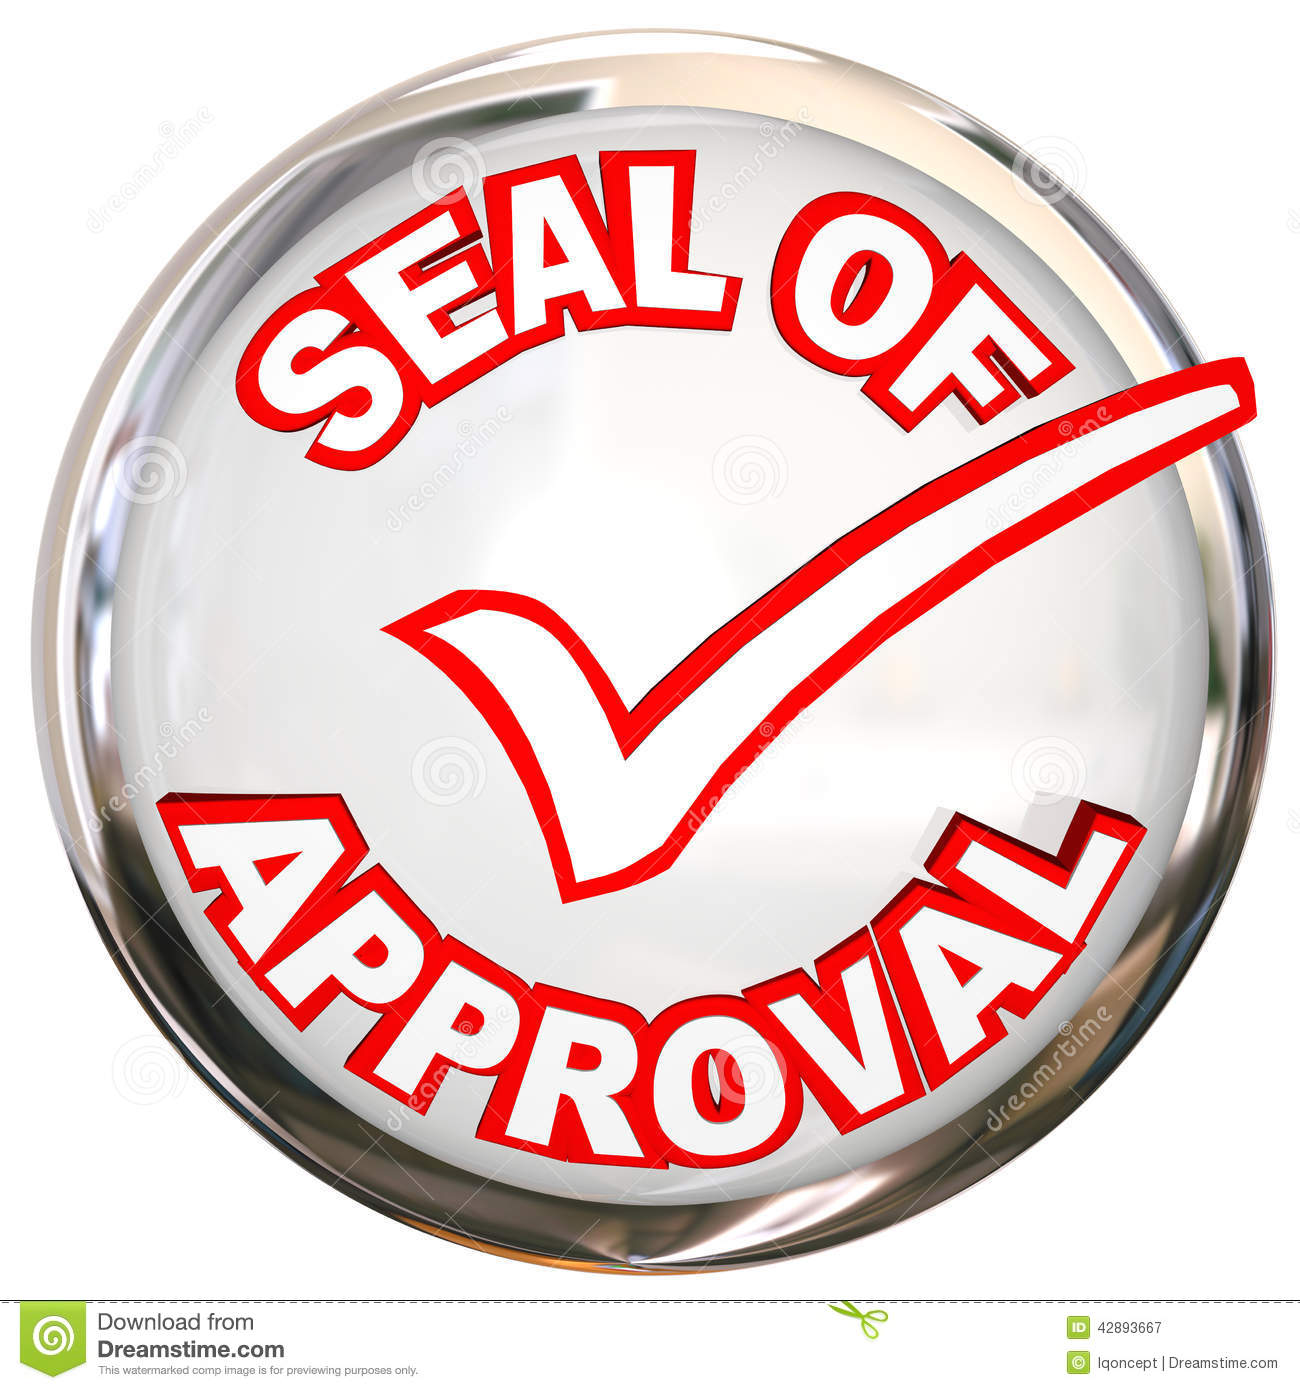 Seal Of Approval Words On A Round Circular Stamp Label Or Logo To    